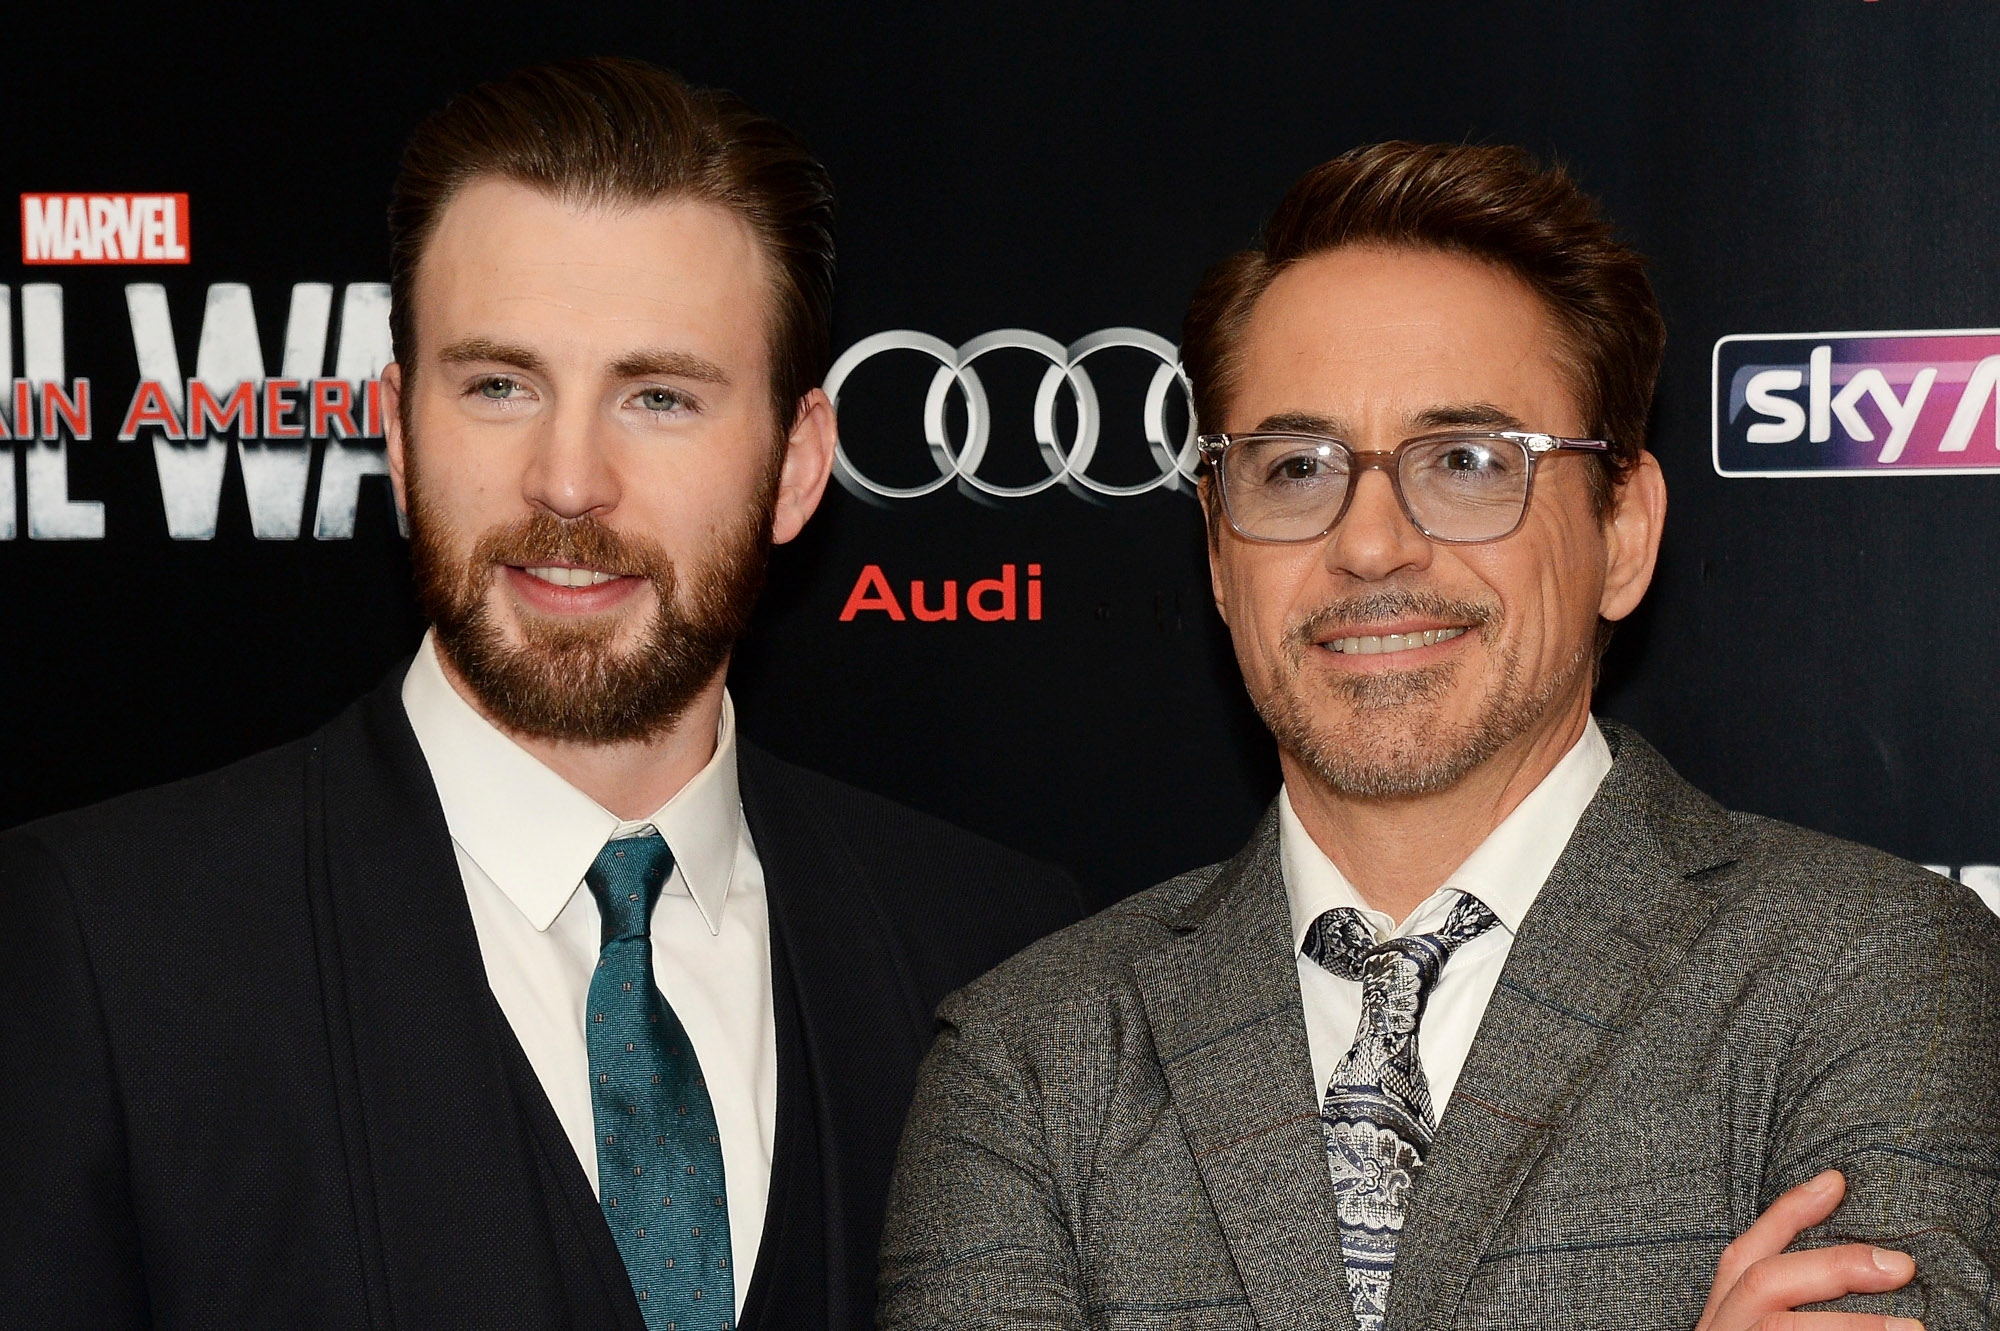 Chris Evans stands next to Robert Downey Jr. at the premiere for 'Captain America: Civil War.' Evans wears a black suit, white shirt, and blue tie. Downey wears a grey suit and tie with a white shirt.